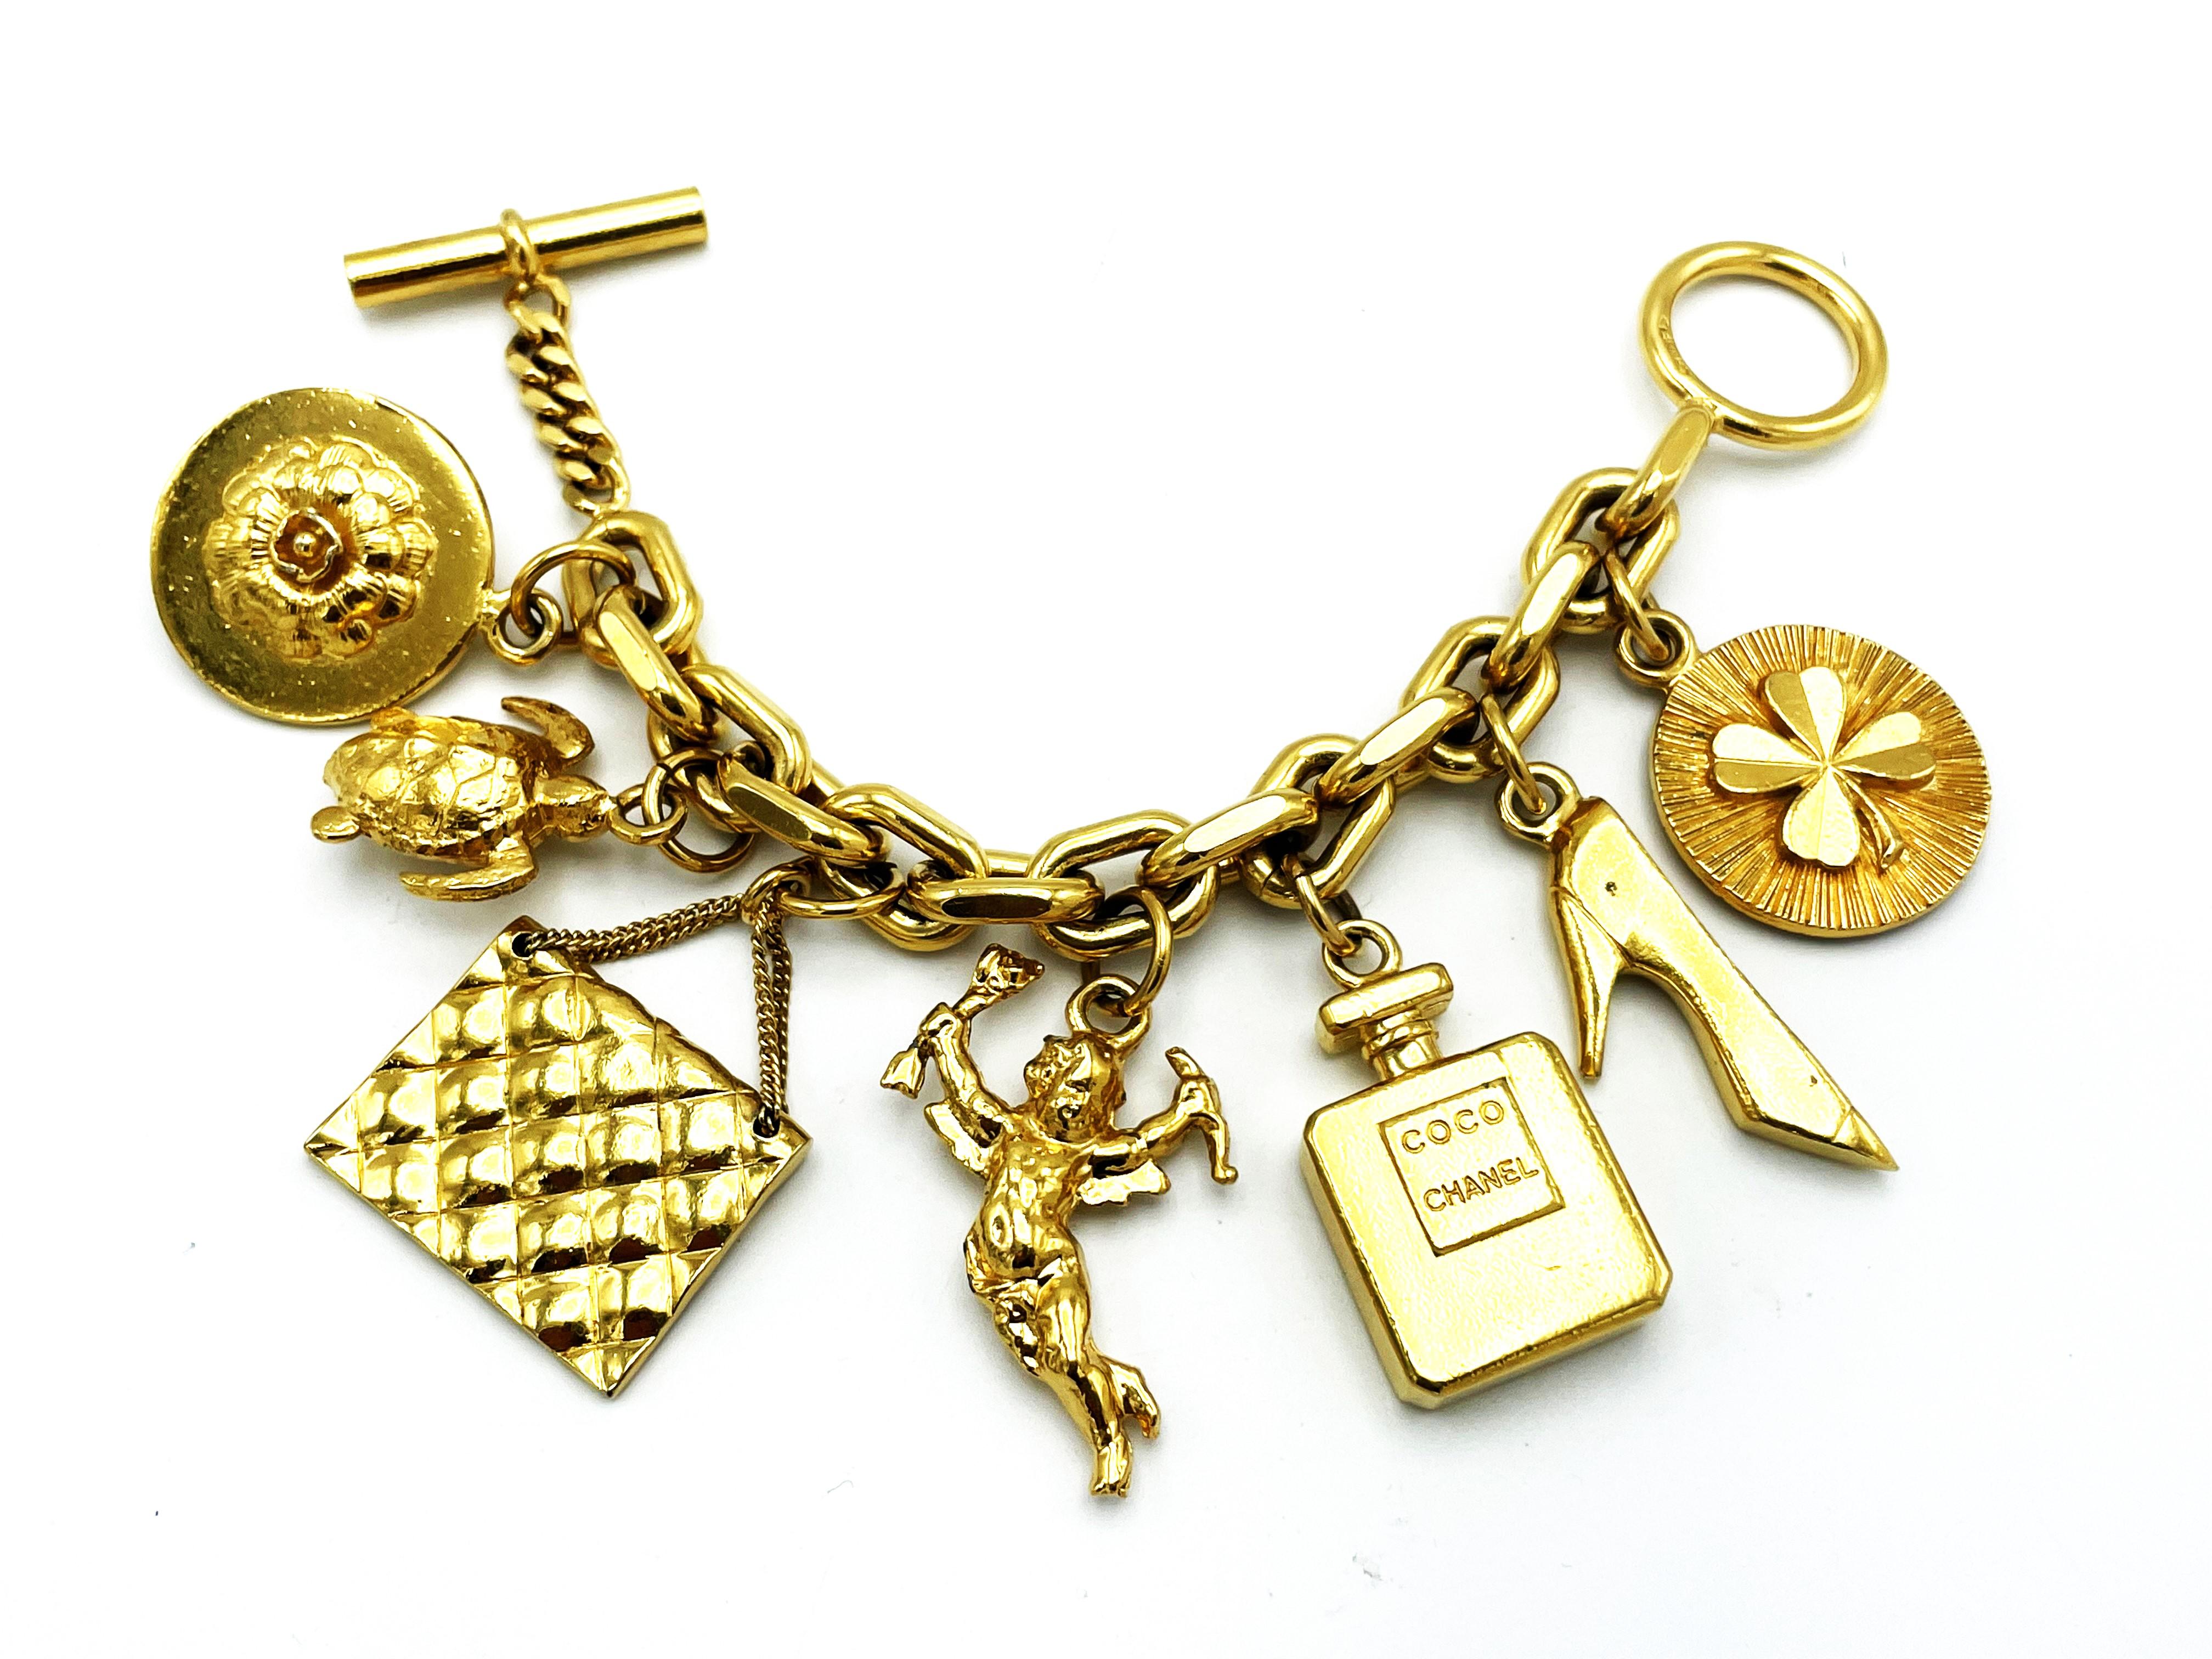 Chanel's gold-tone chain link bracelet with seven iconic Chanel items hung from the chain such as a shamrock, heels, a perfume bottle, cupid, a quilted Chanel bag and a turtle, a camellia, Coco Chanel's favorite flower! All iconic charms are almost